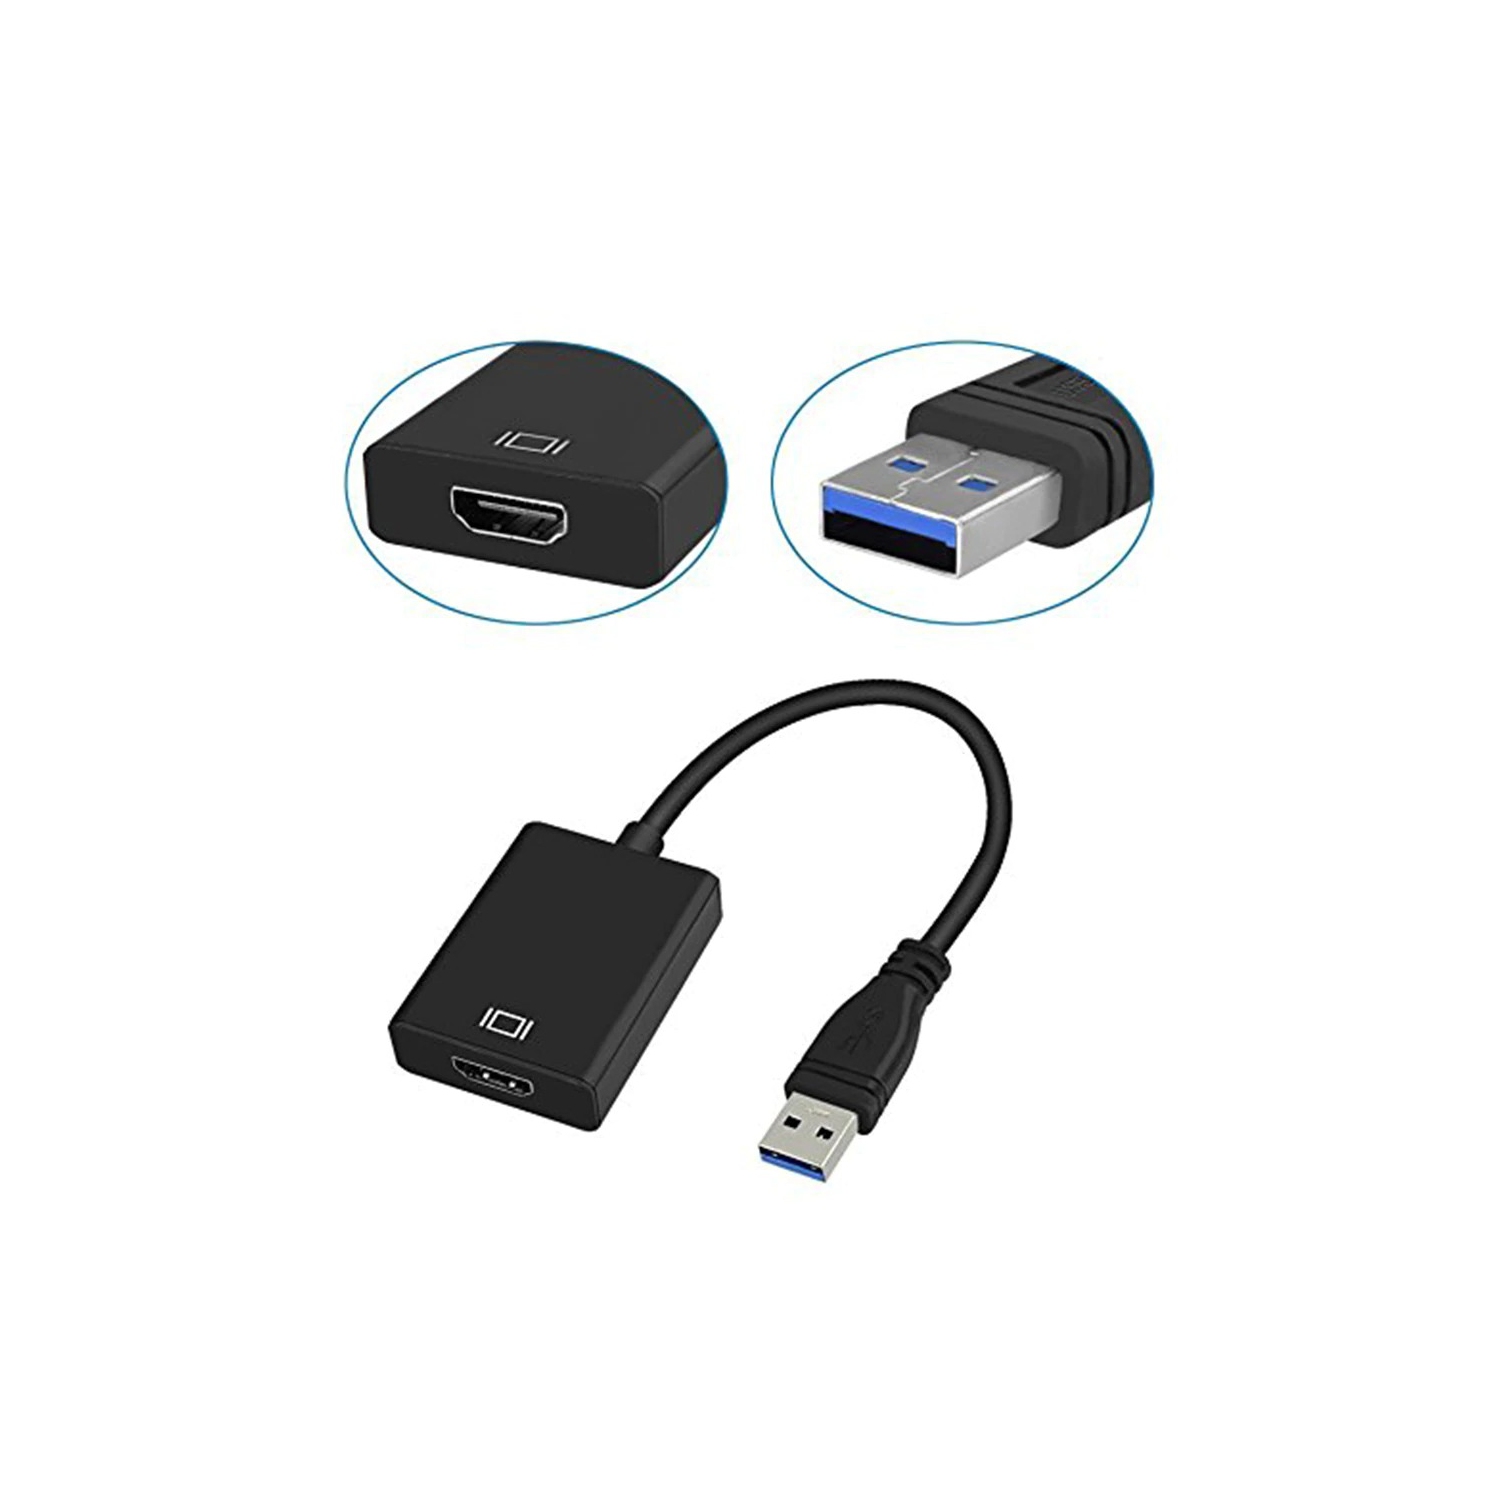 USB 3.0 to HDMI Cable Adapter Multi Display Video Converter, Windows 7 8 10, Desktop, Laptop, PC, Monitor, Projector, HDTV [Not Support Linux, Chromebook]